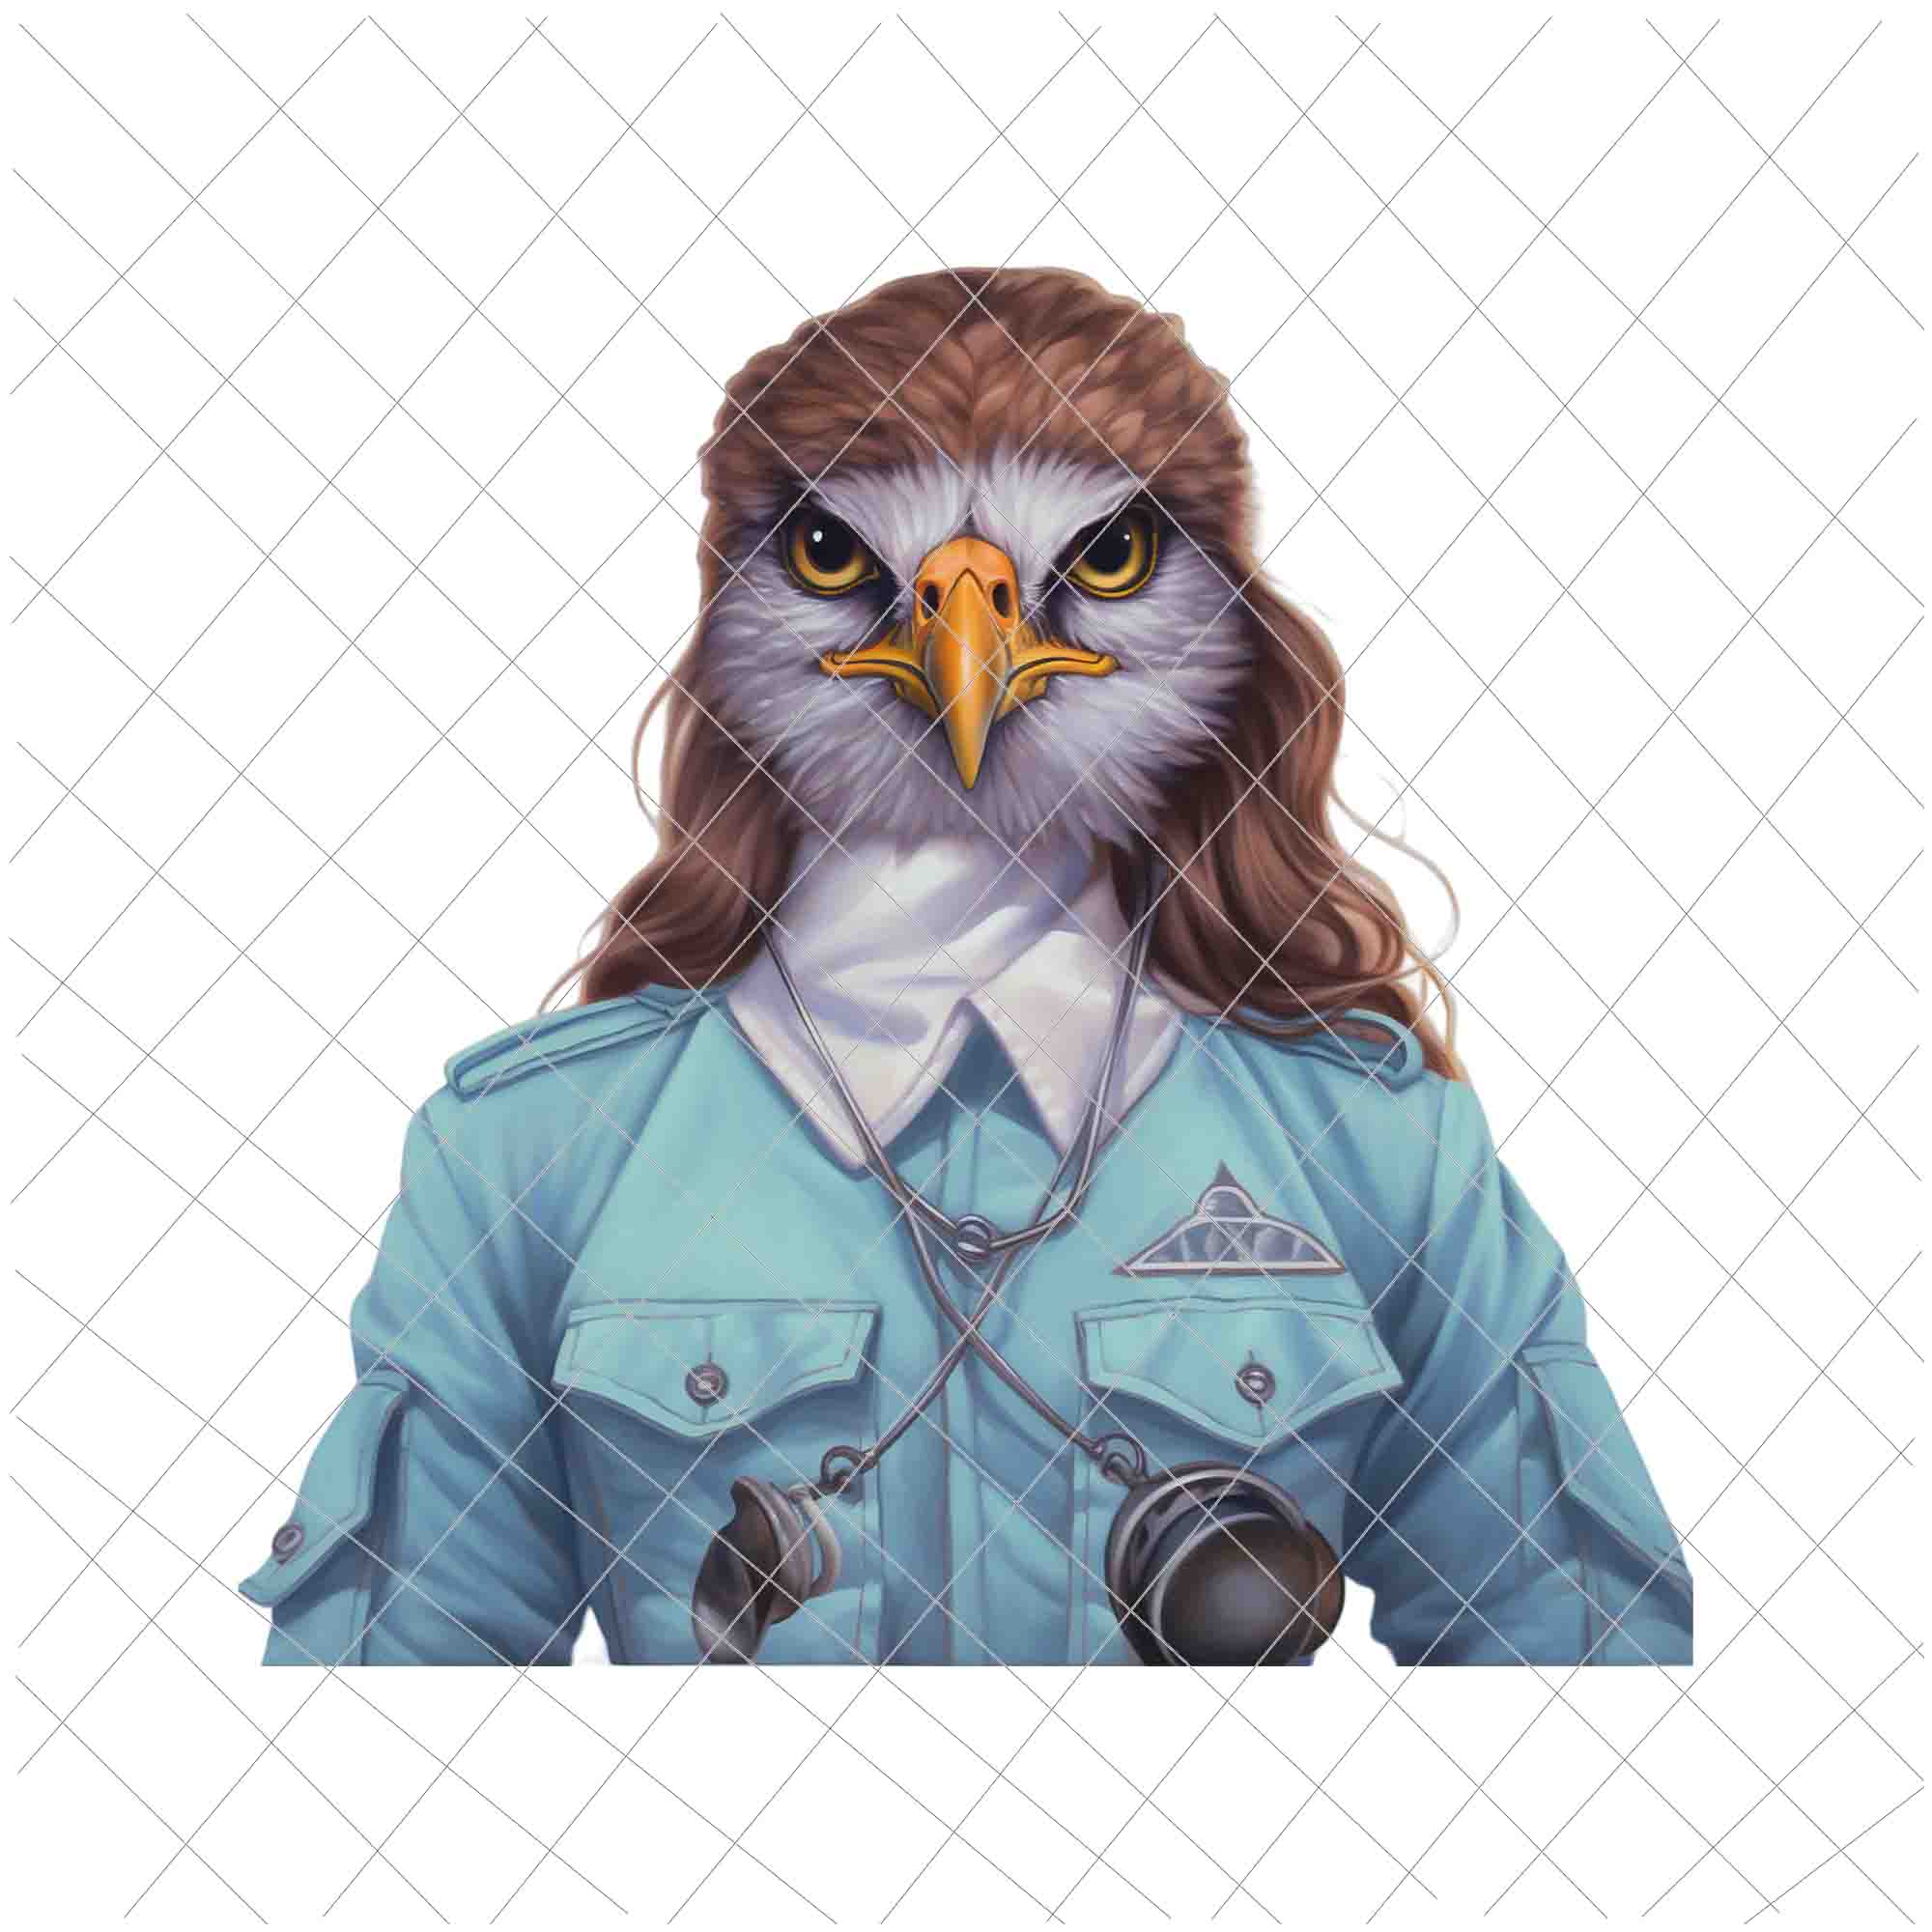 American Bald Eagle Mullet 4th Of July Png, American Eagle Nurse Png, Eagle 4th Of July Nurse Png, American Eagle USA Patriotic Nurse Png, Eagle Patriotic Day Png